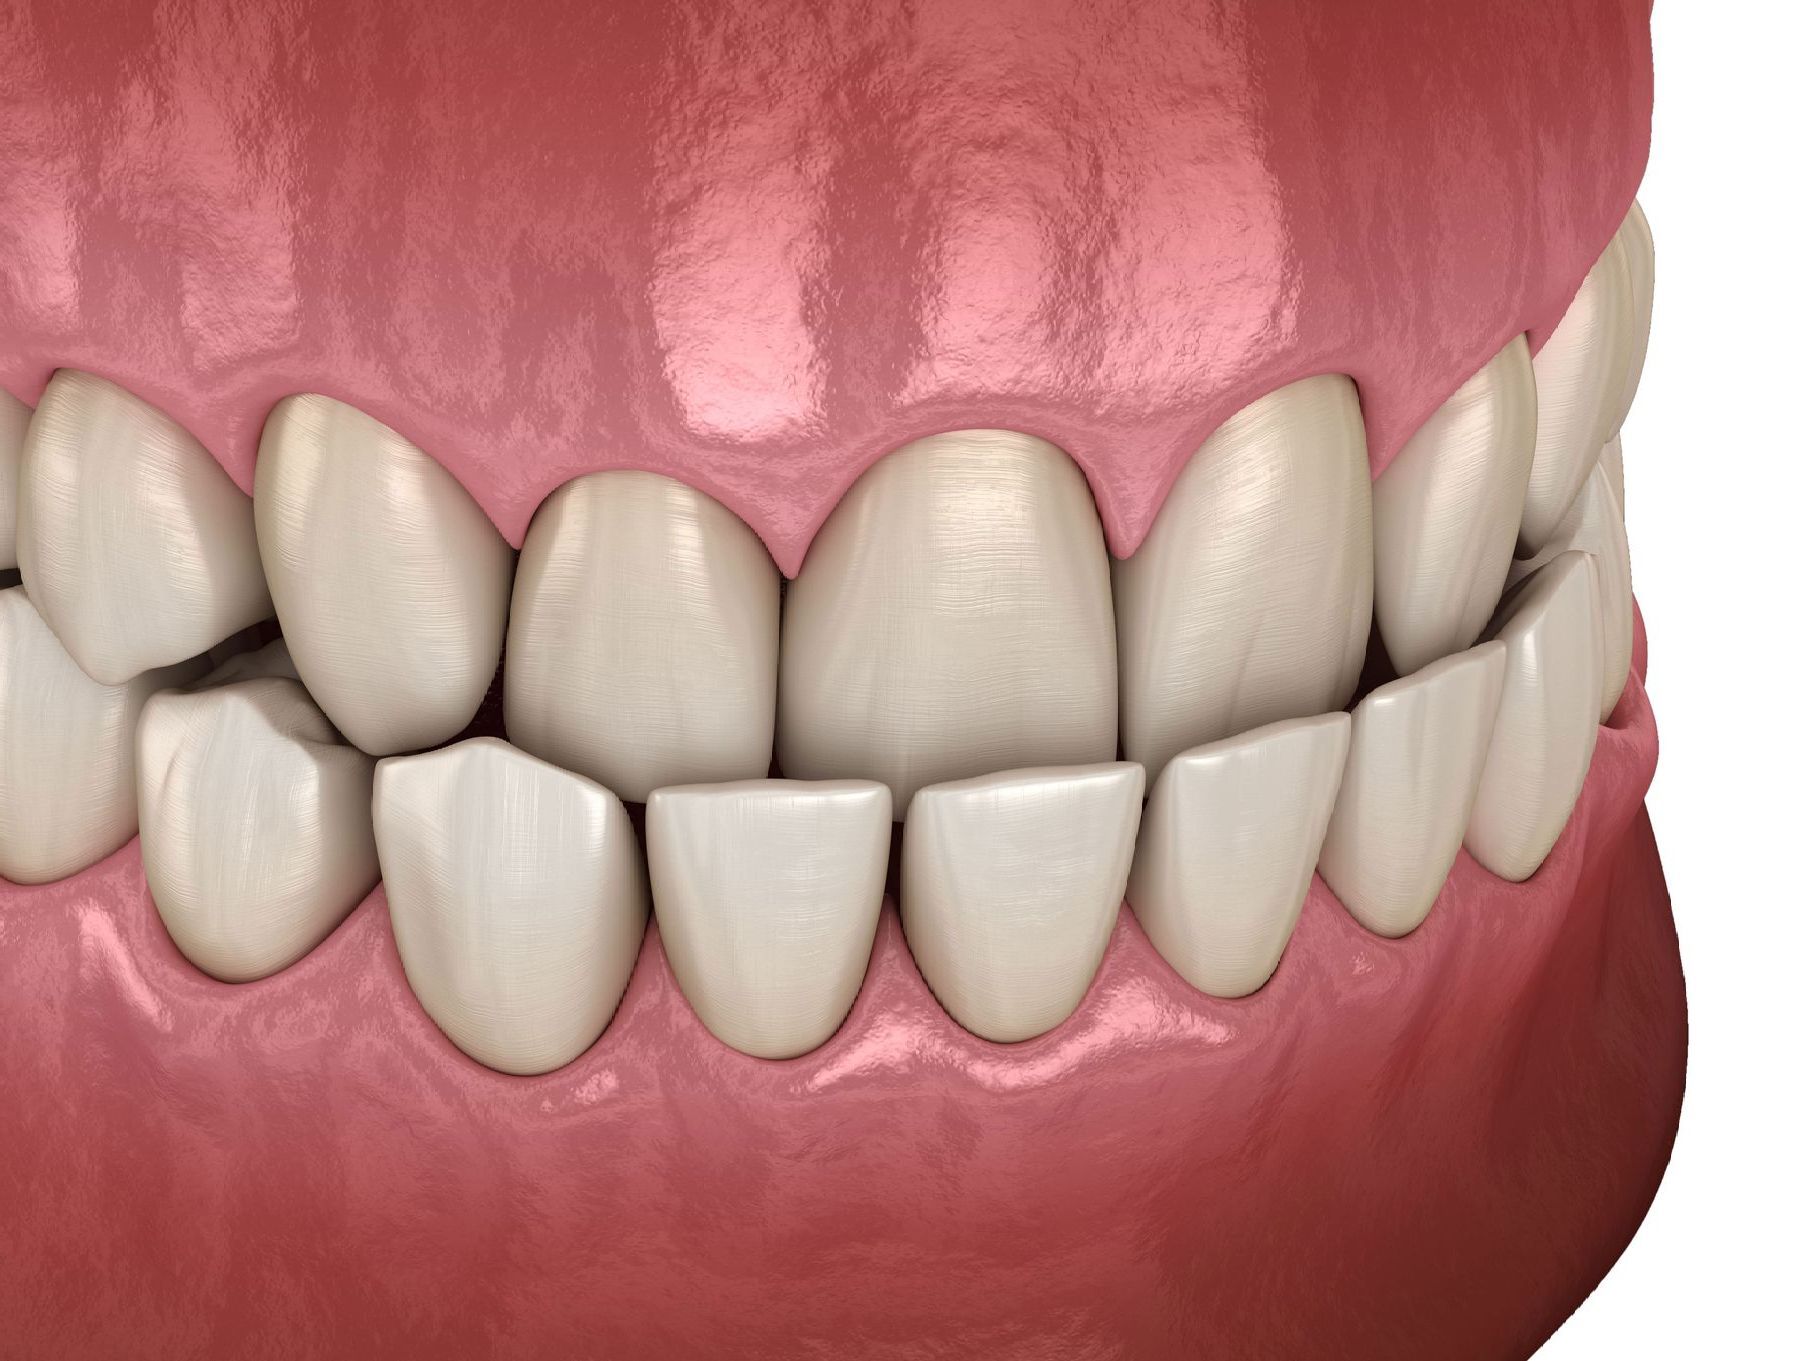 A computer generated image of teeth with an underbite